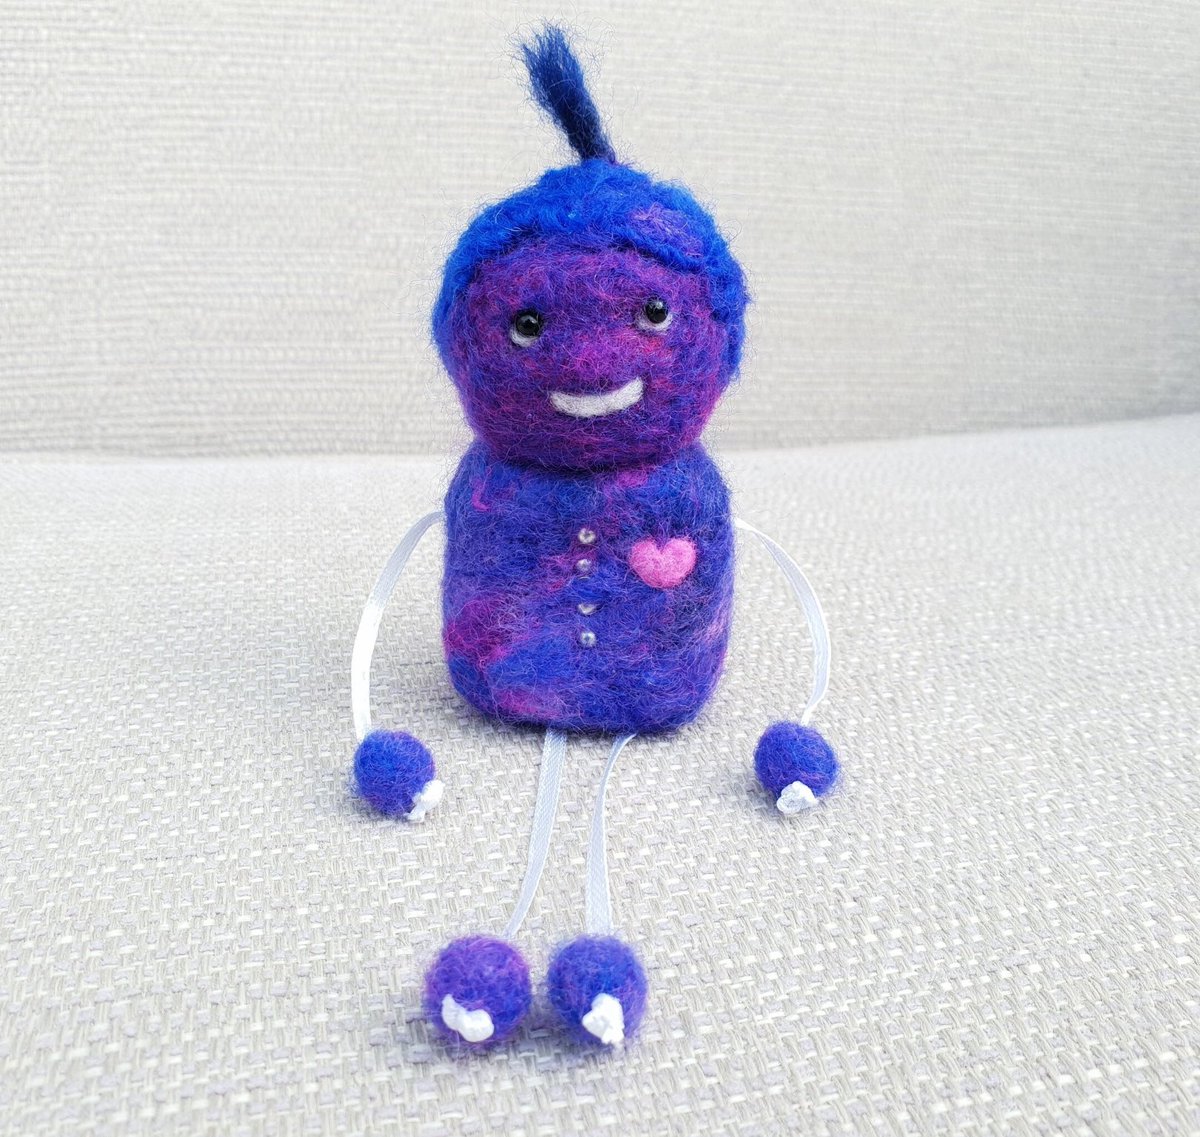 Happy Friday! I was feeling a bit loopy when I created this! I wonder if anyone would like to pop him on their bookshelf? I’m sure you won’t find another one like him 😁💜 etsy.com/listing/125576… #etsy #robot #book #handmade #elevenseshour #uniquegifts